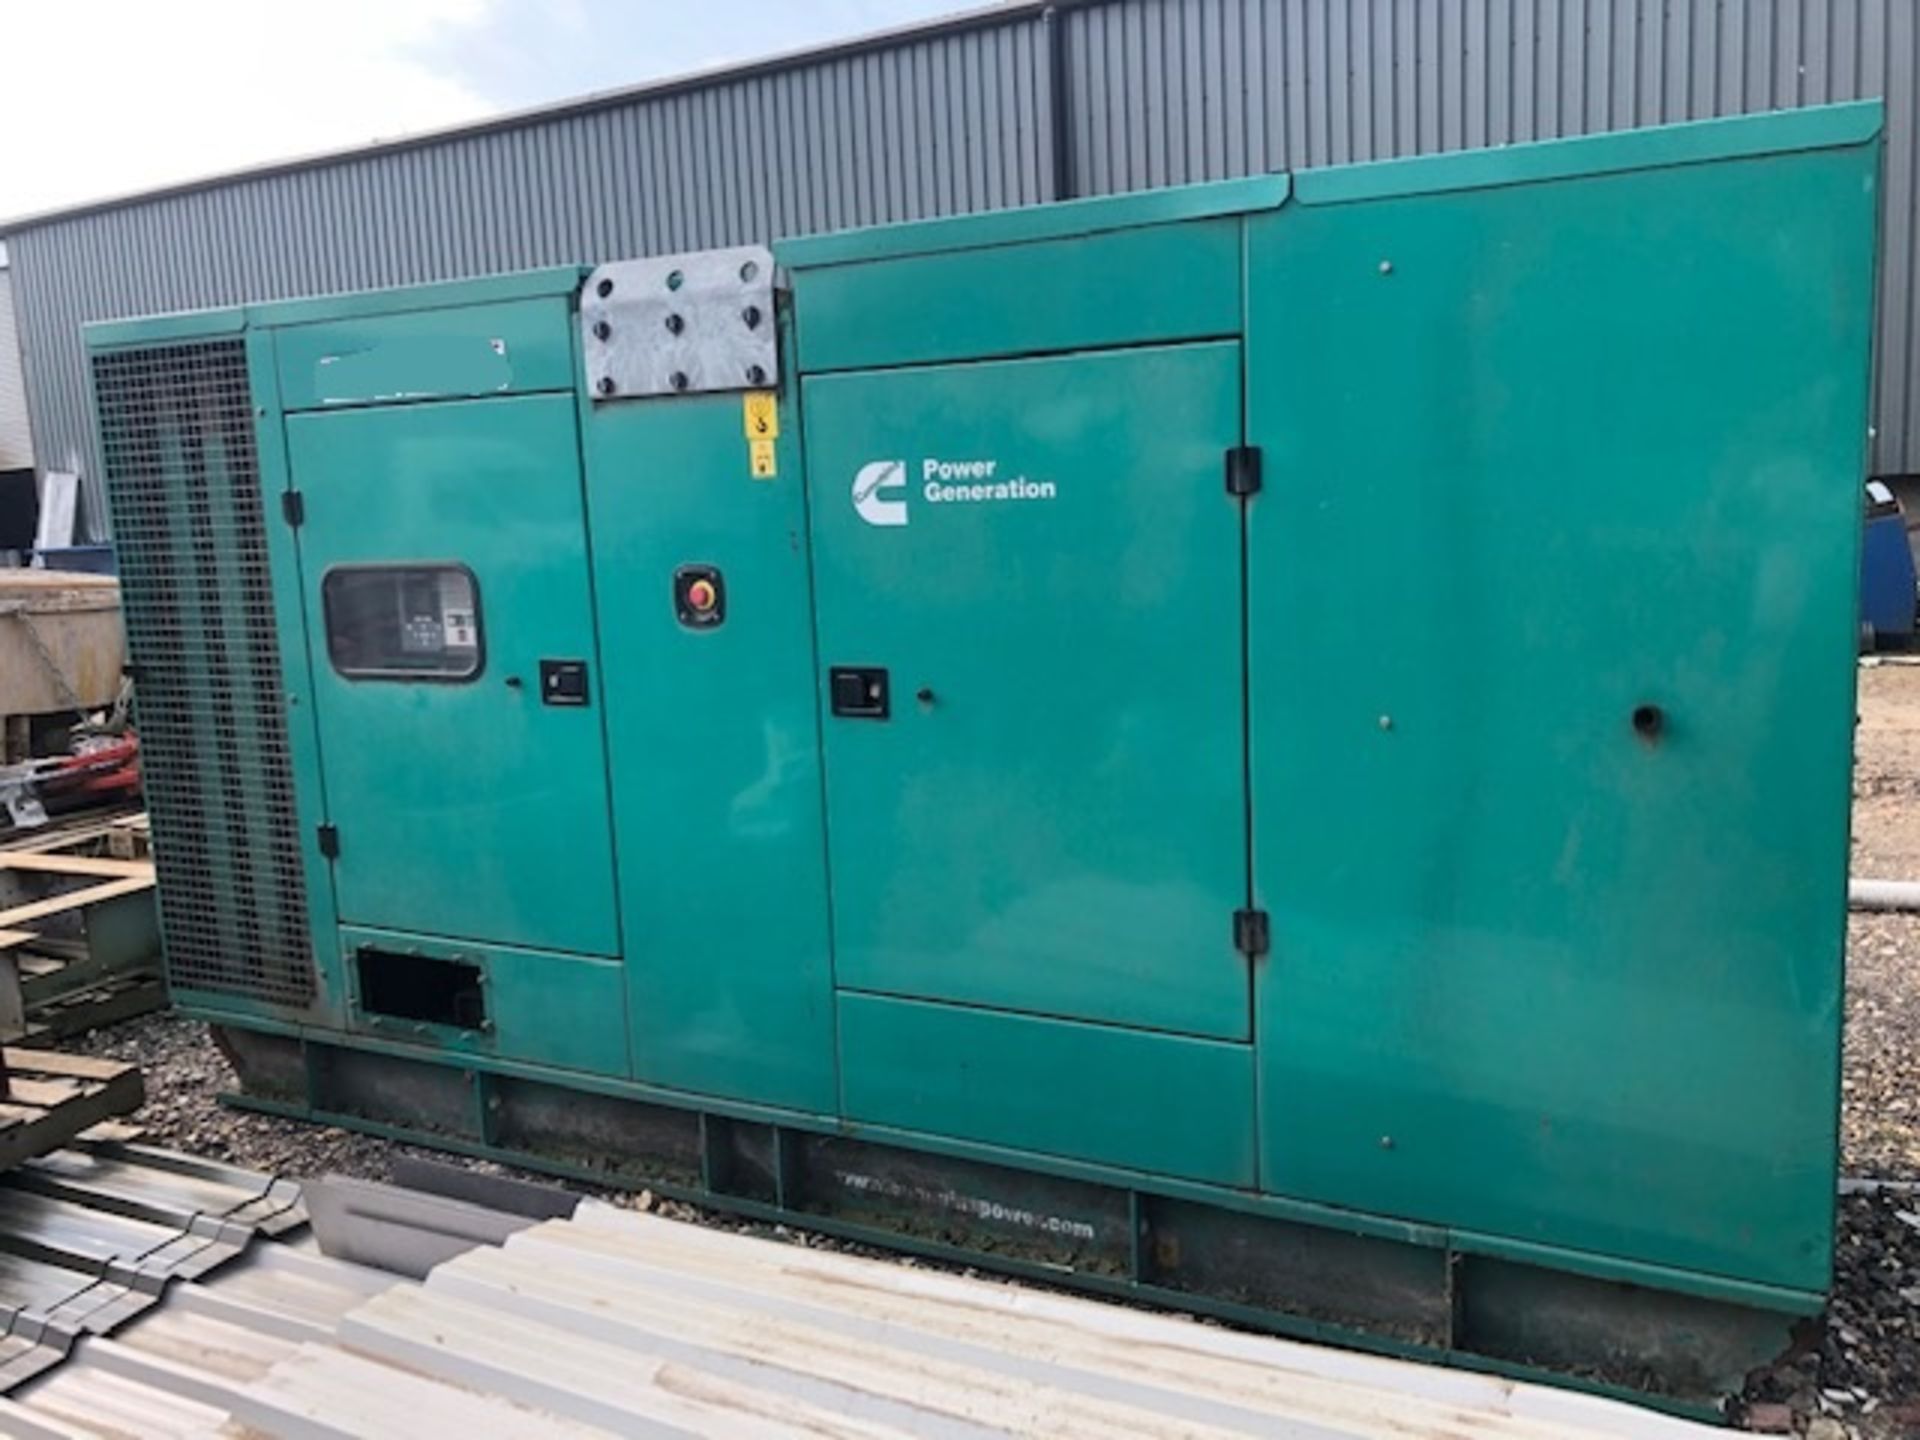 CUMMINS ENGINED 300KVA GENERATOR YEAR 2012 8367 REC HRS. DIRECT FROM LOCAL COMPANY AFTER UPGRADING